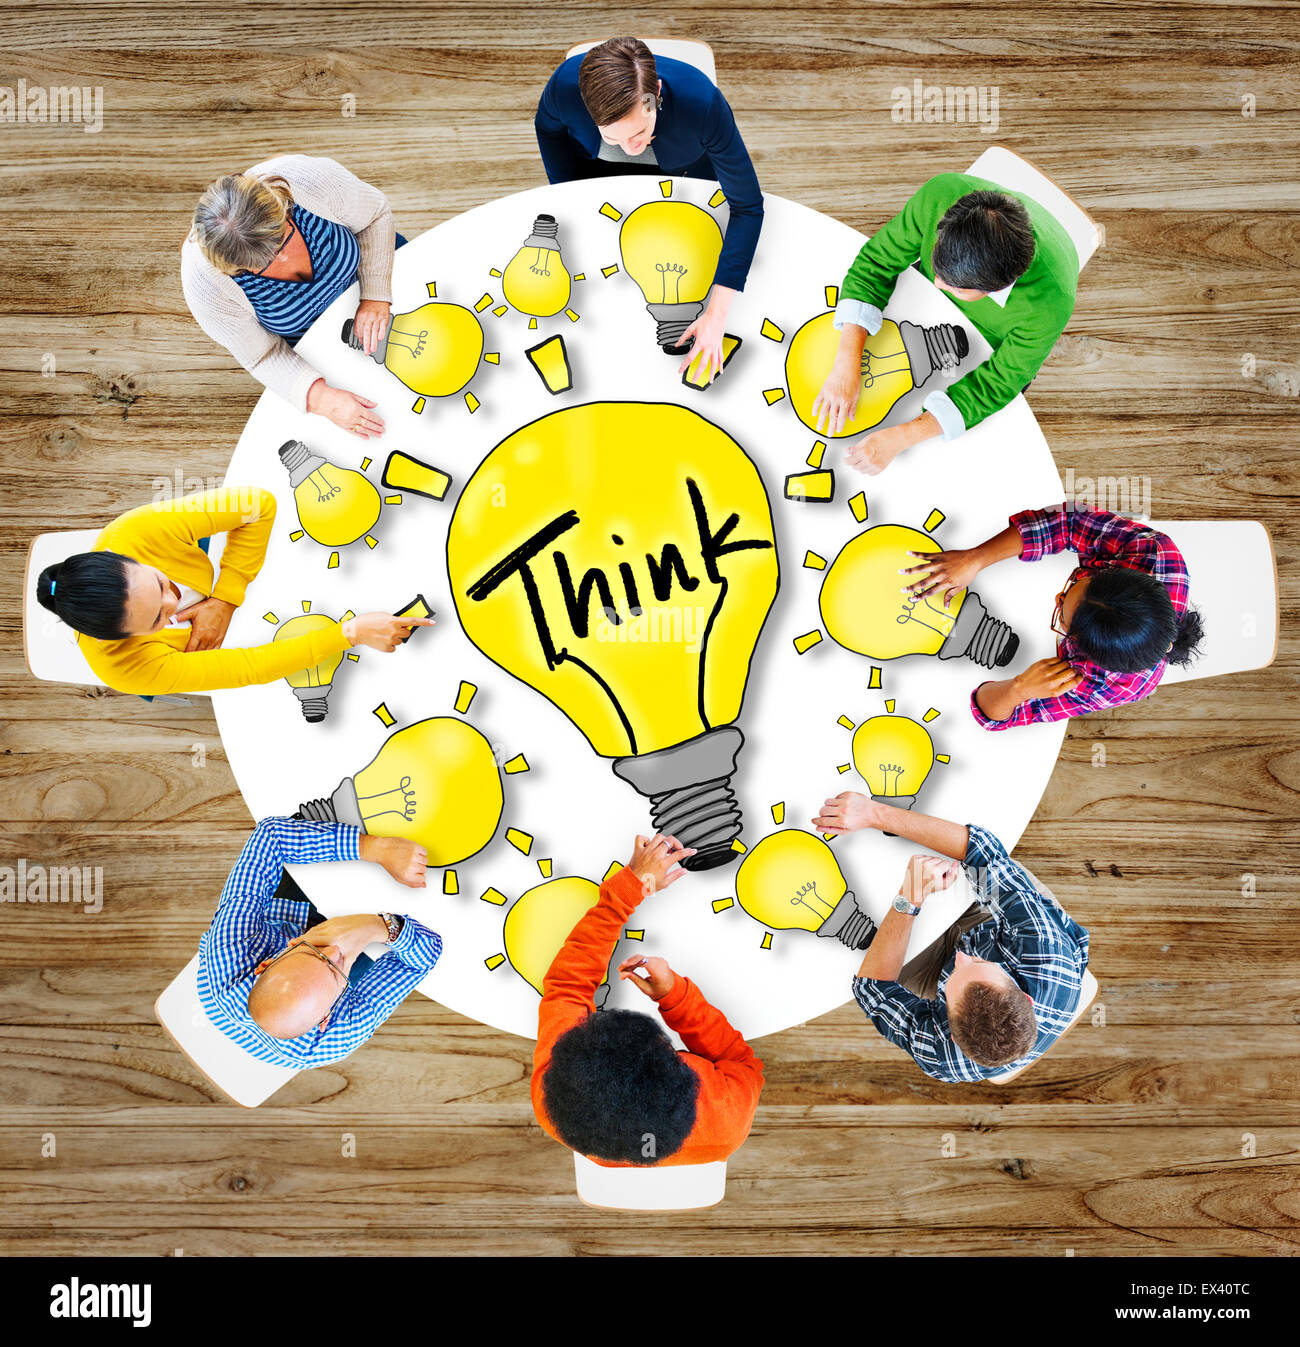 Aerial View People Ideas Innovation Motivation Think Concepts Stock Photo